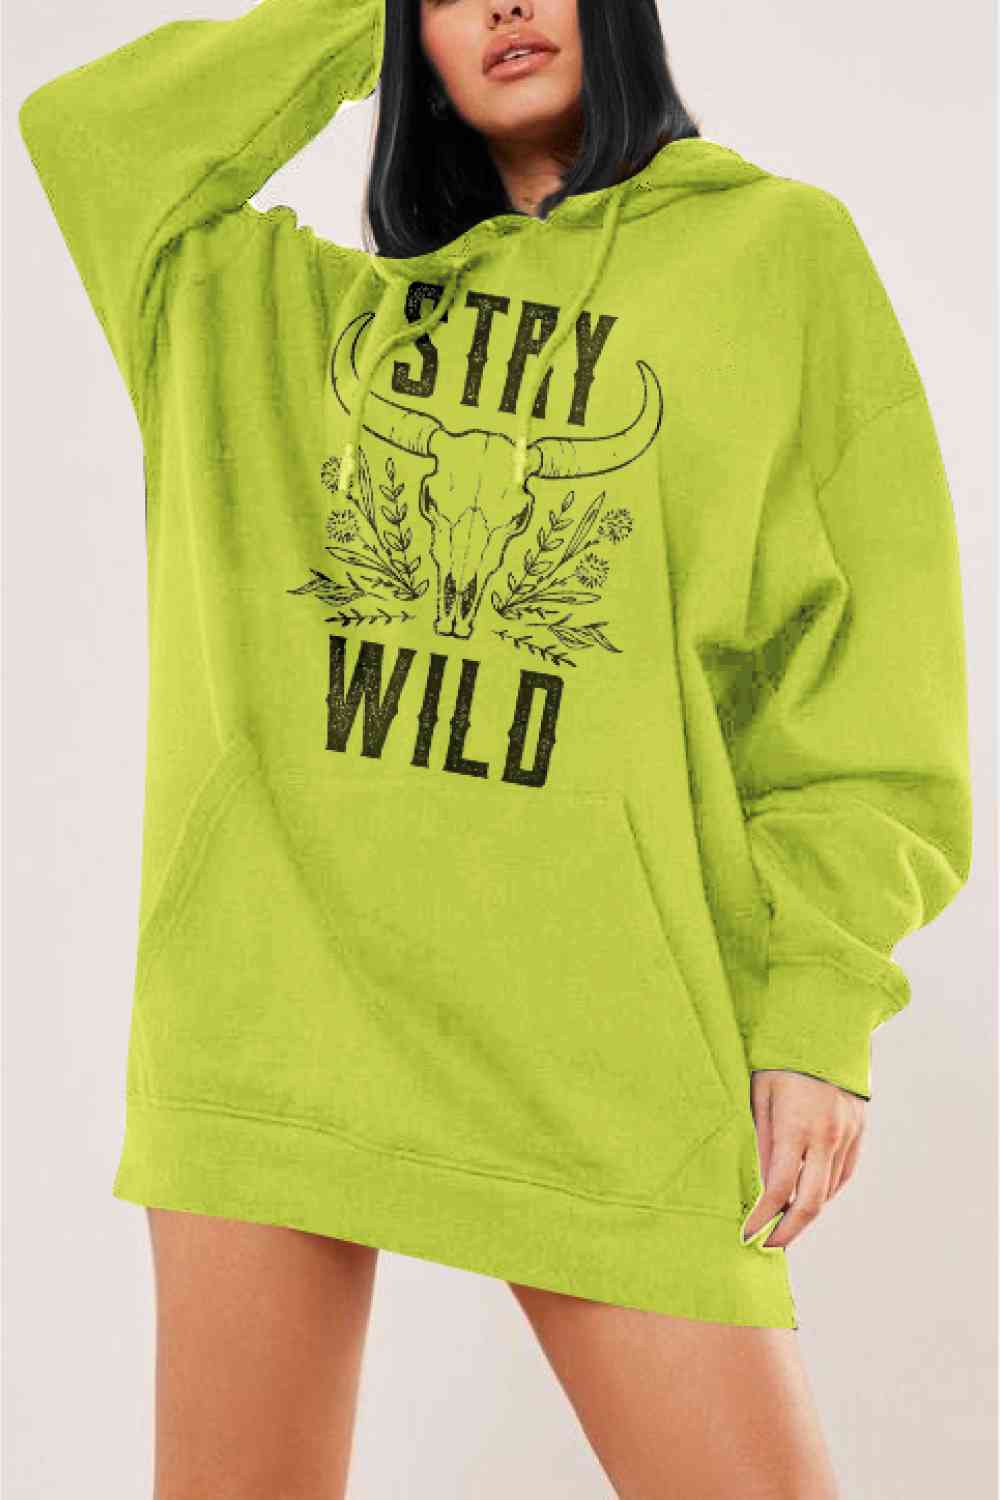 Simply Love Simply Love Full Size STAY WILD Graphic Hoodie - Tophatter Deals